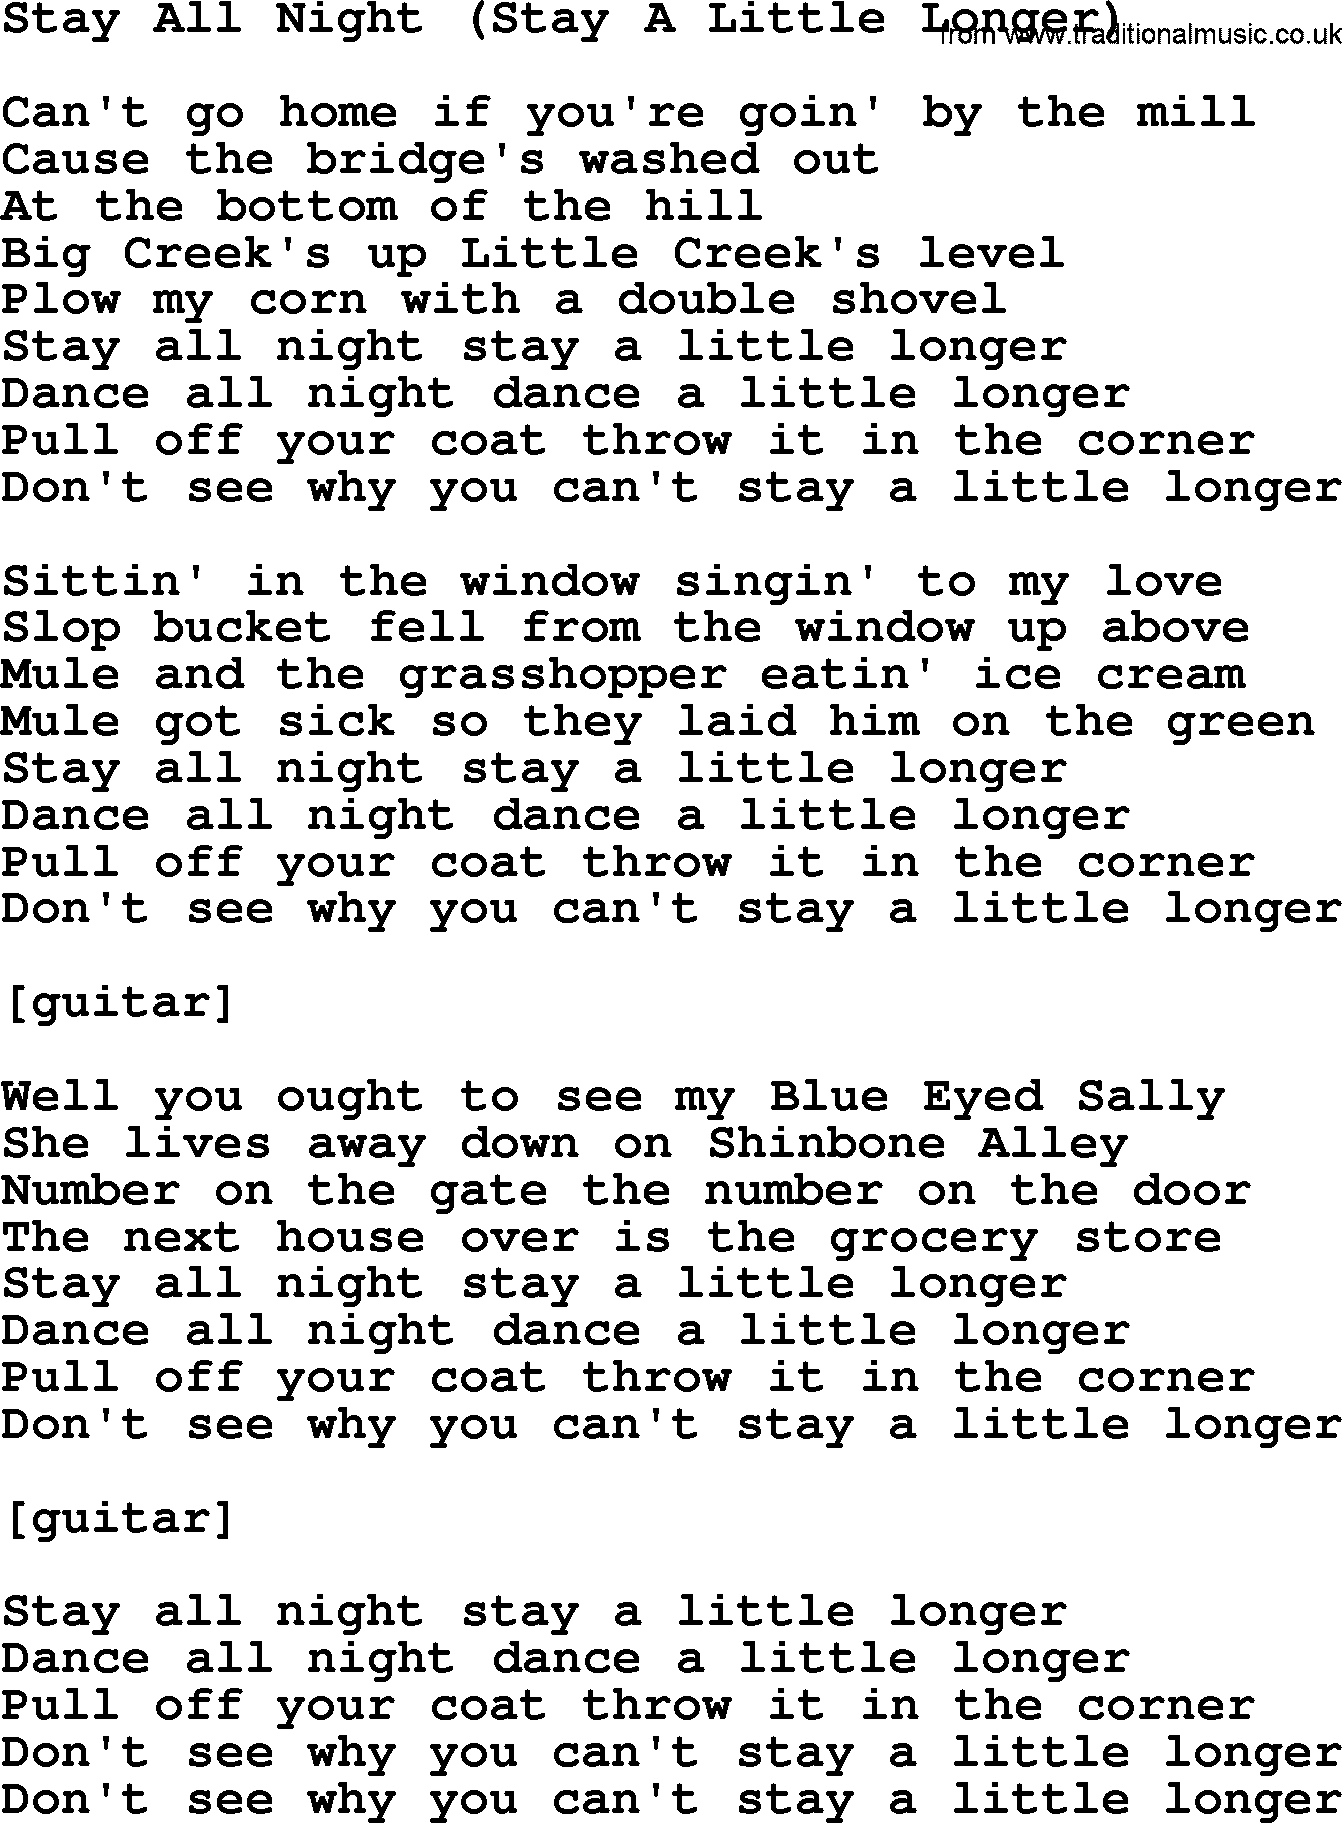 Willie Nelson song: Stay All Night (Stay A Little Longer) lyrics